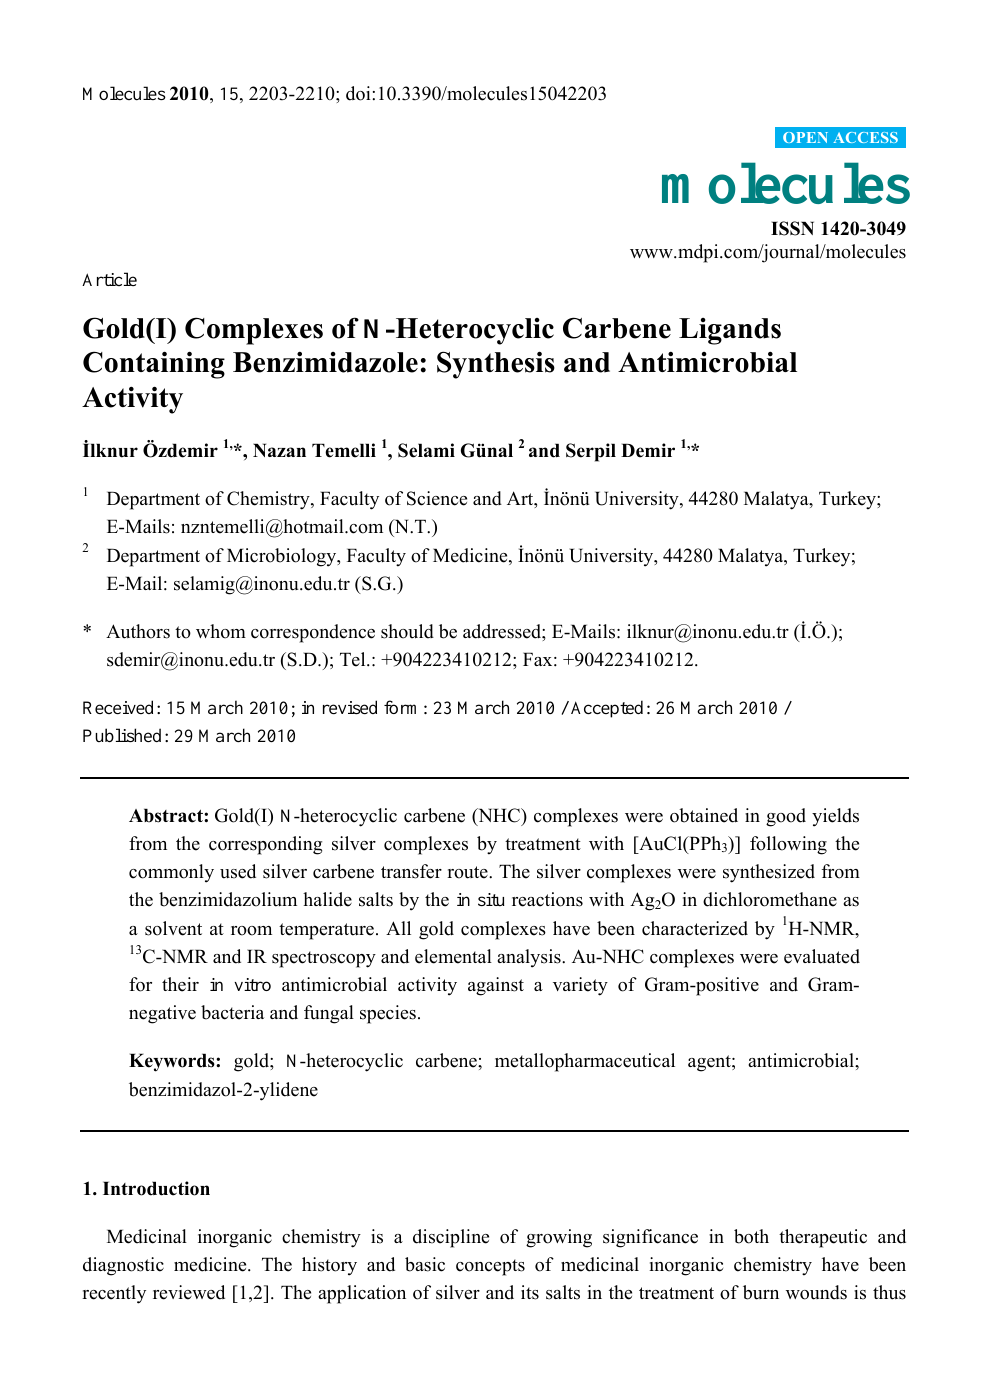 Gold I Complexes Of N Heterocyclic Carbene Ligands Containing Benzimidazole Synthesis And Antimicrobial Activity Topic Of Research Paper In Chemical Sciences Download Scholarly Article Pdf And Read For Free On Cyberleninka Open Science